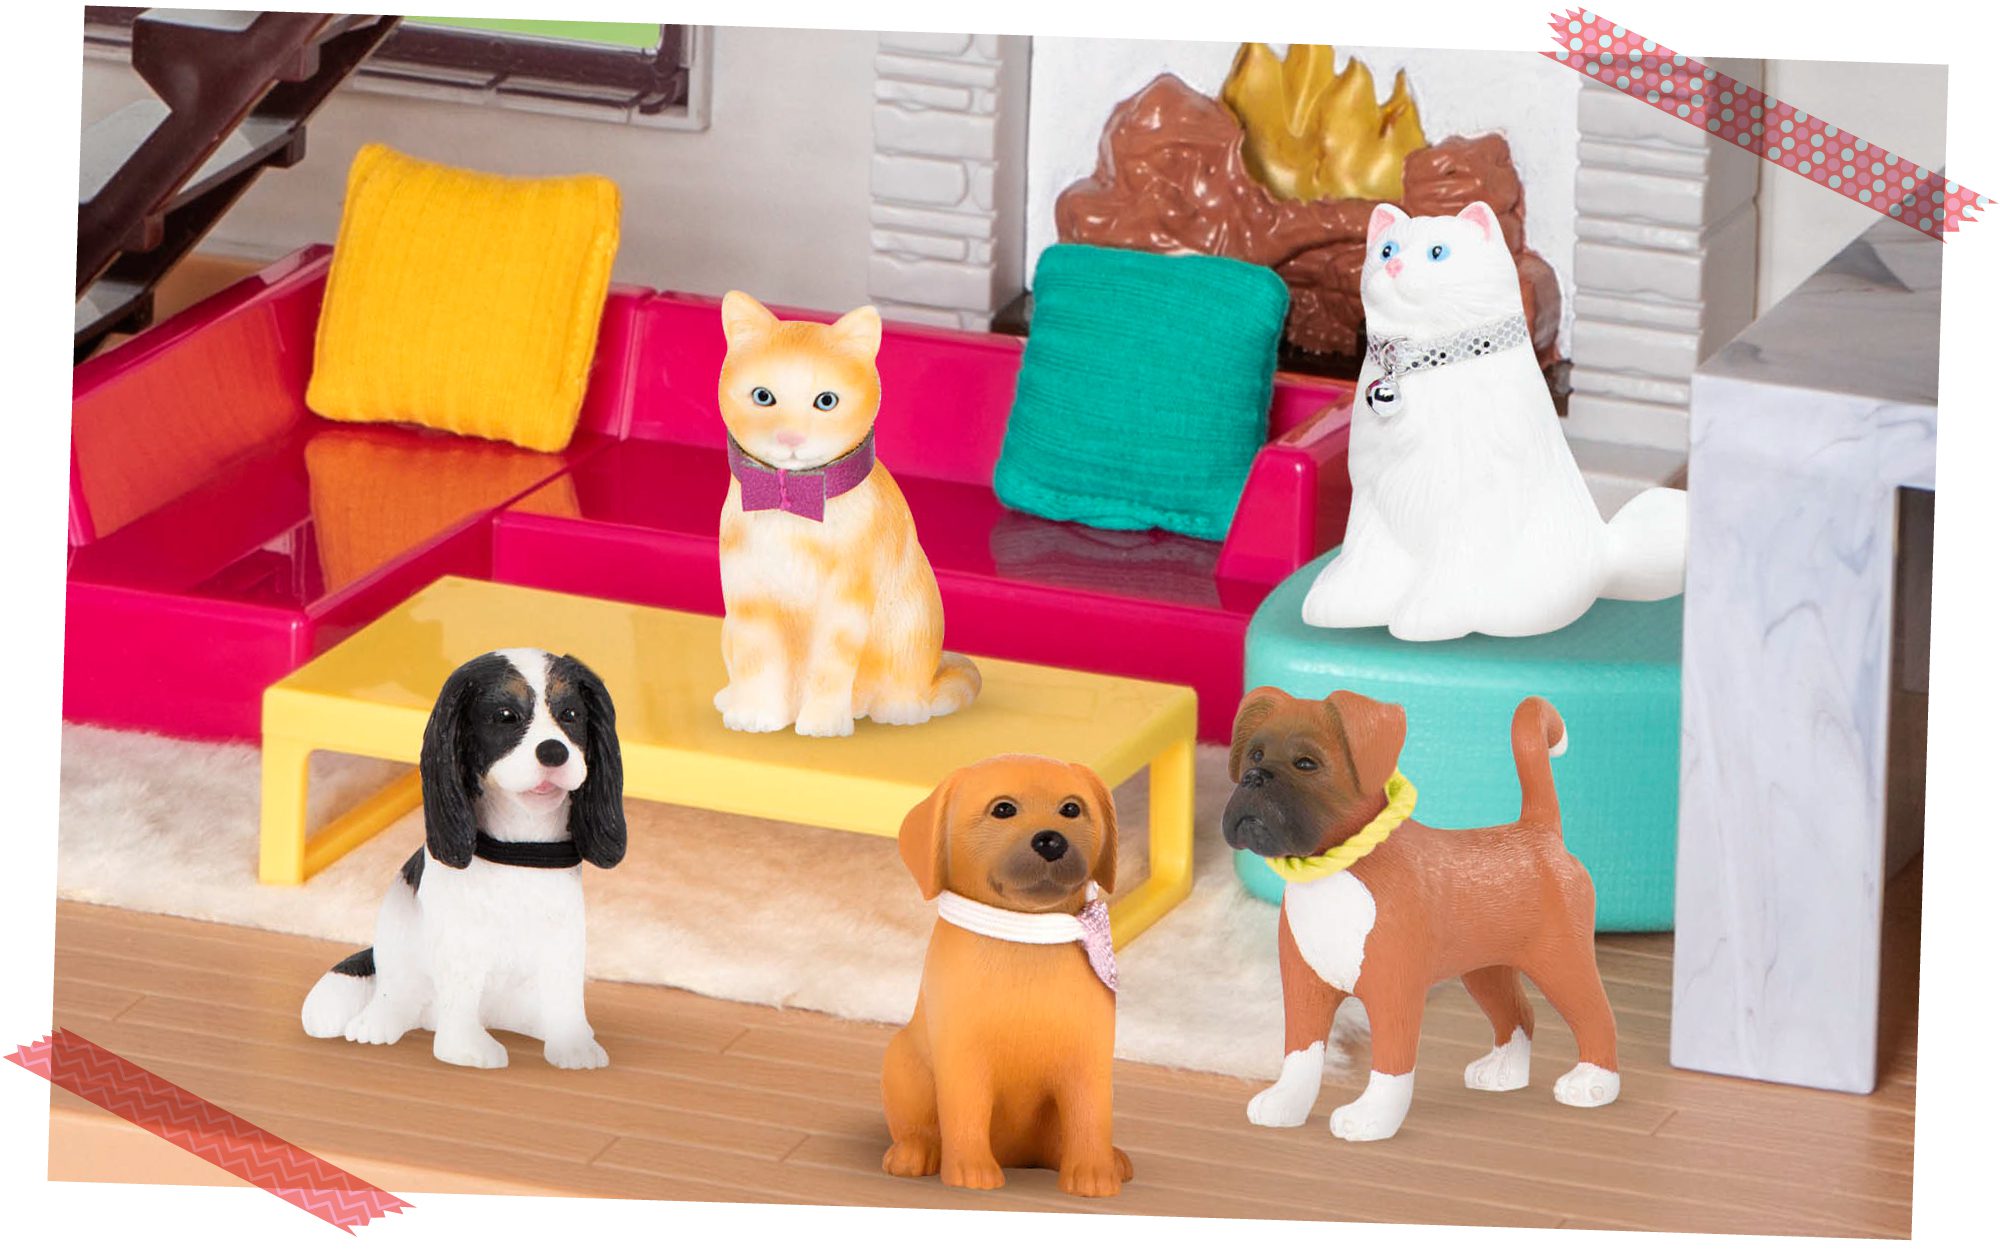 Toy dog and cat figurines in a living room.